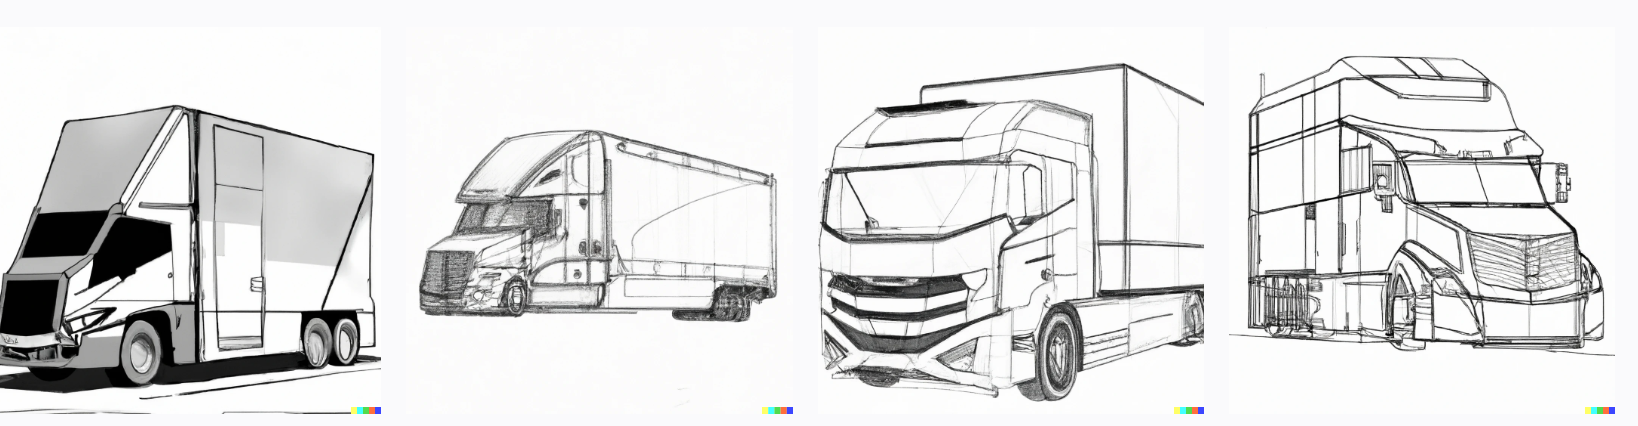 Transpoter vehicle self-driving no cabin lorry, sketch design